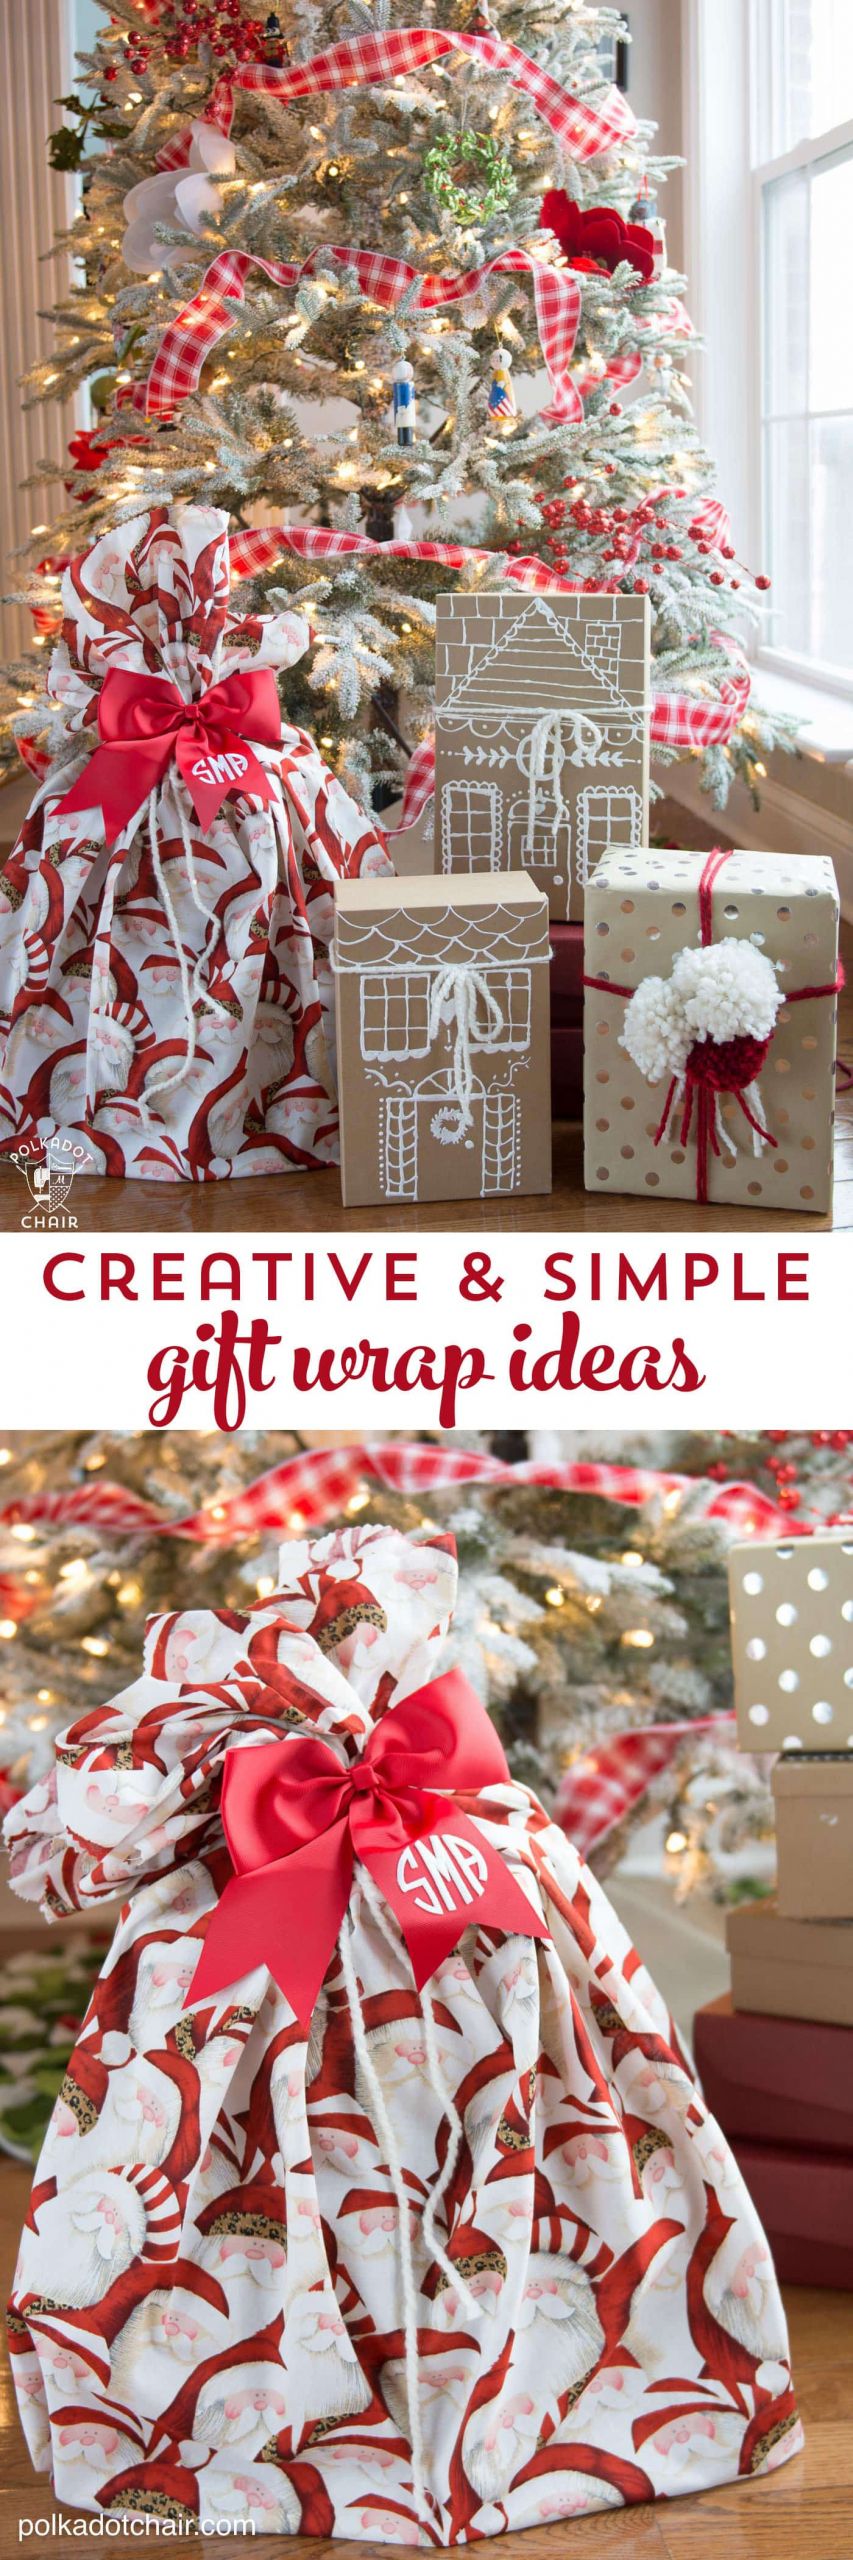 Christmas Gift Wrapping Ideas Pinterest
 3 Simple and Creative Gift Wrap Ideas The Polka Dot Chair